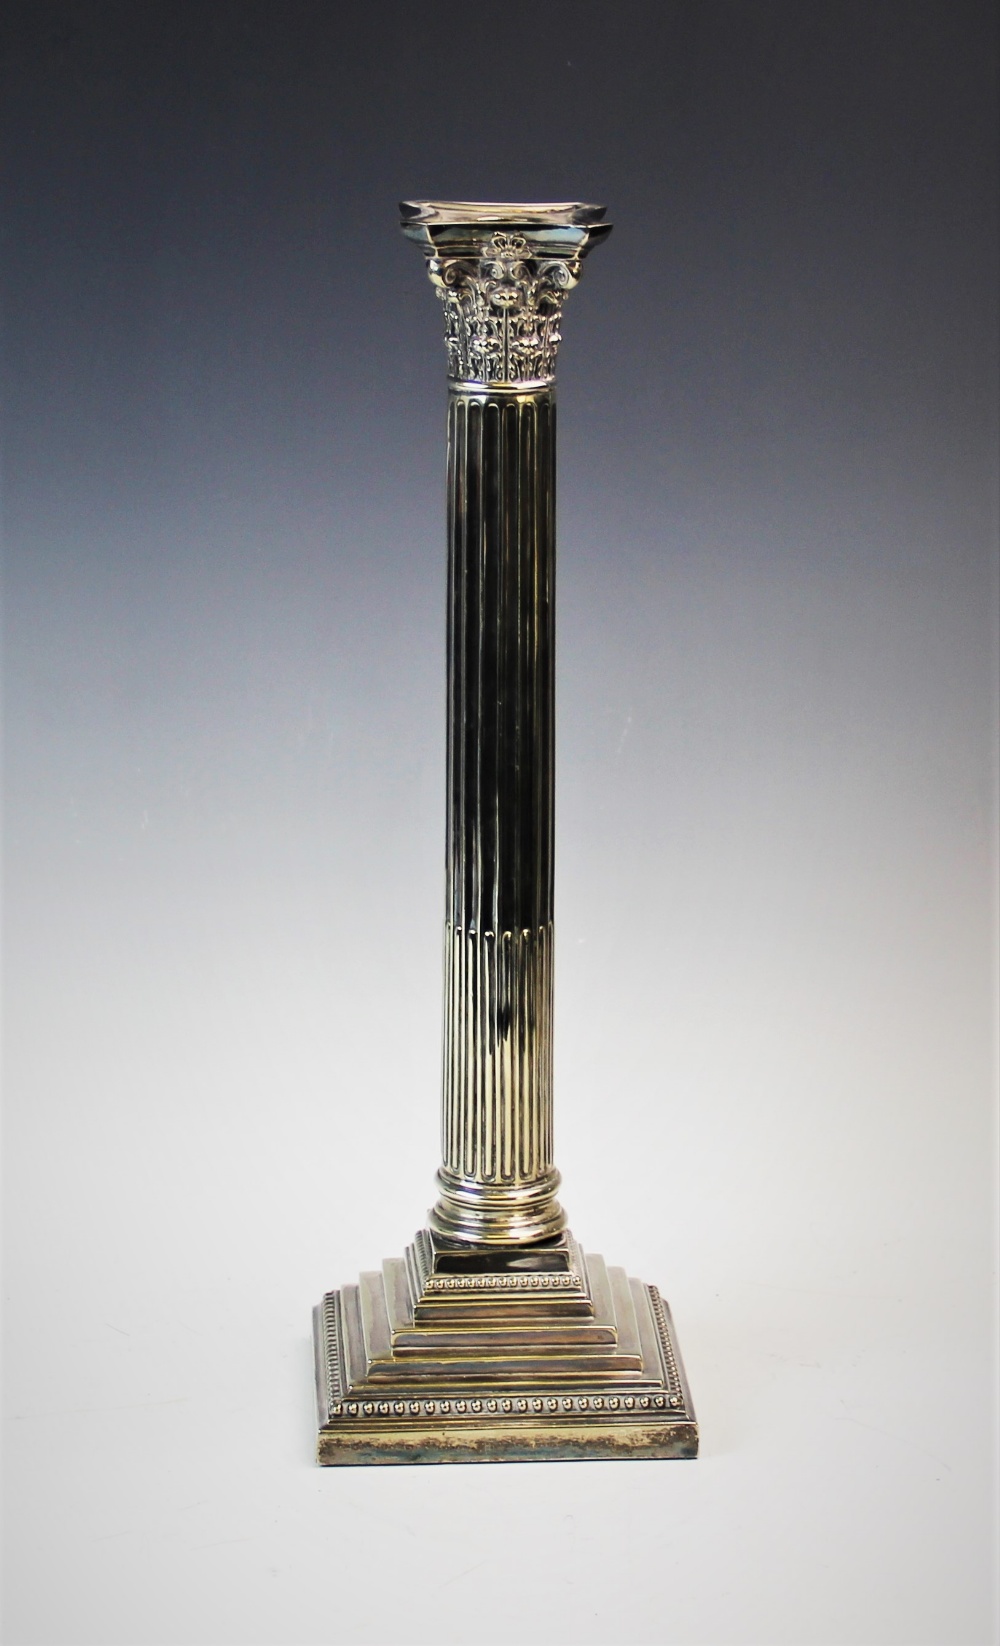 An early 20th century silver plated candlestick, designed as a Corinthian capital, atop a stop-